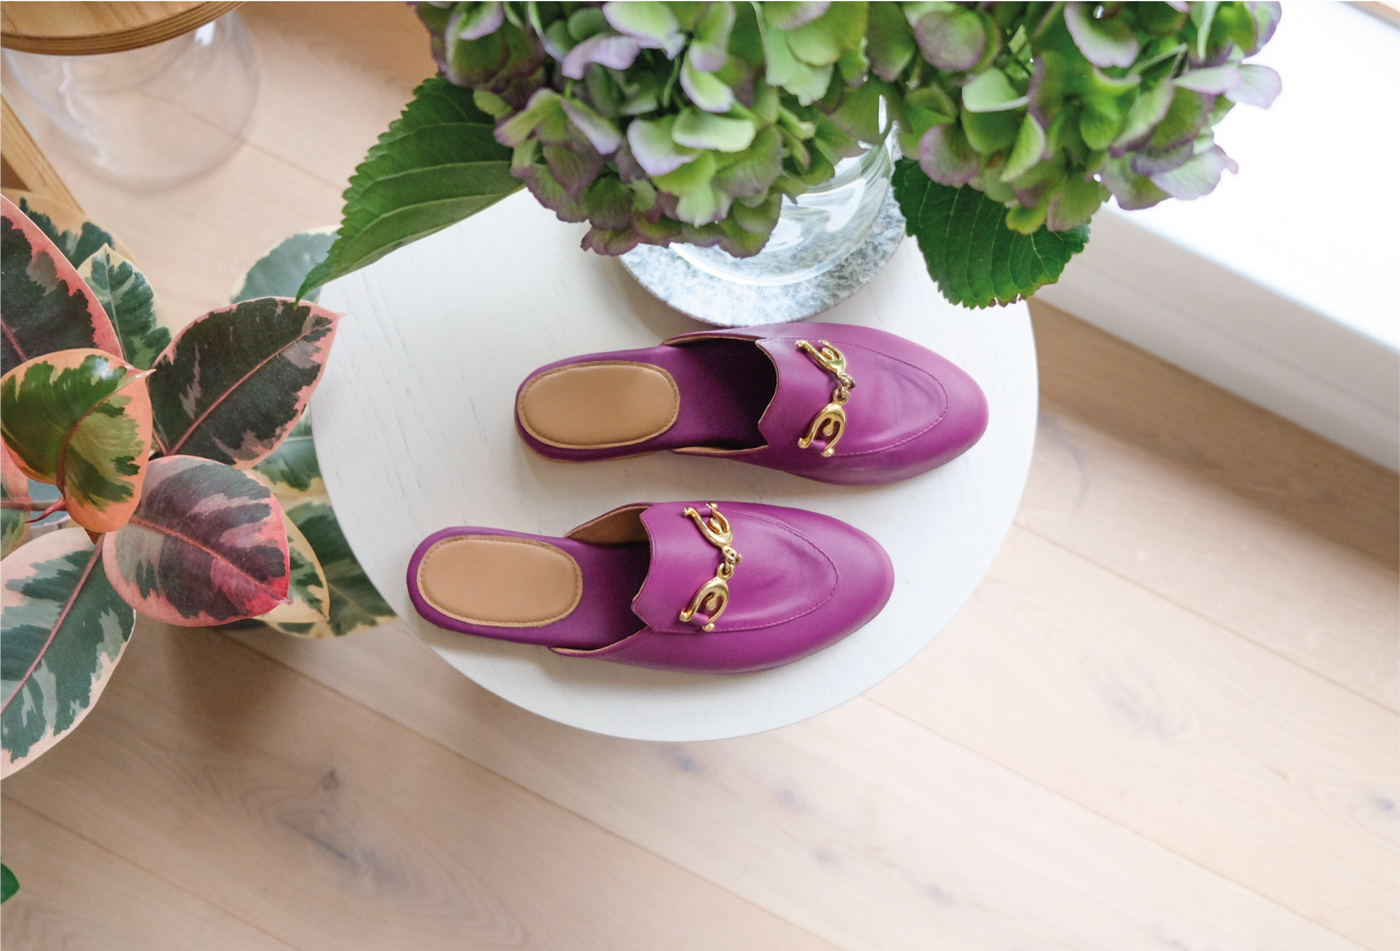 HOW TO MAKE LOAFER SLIDERS